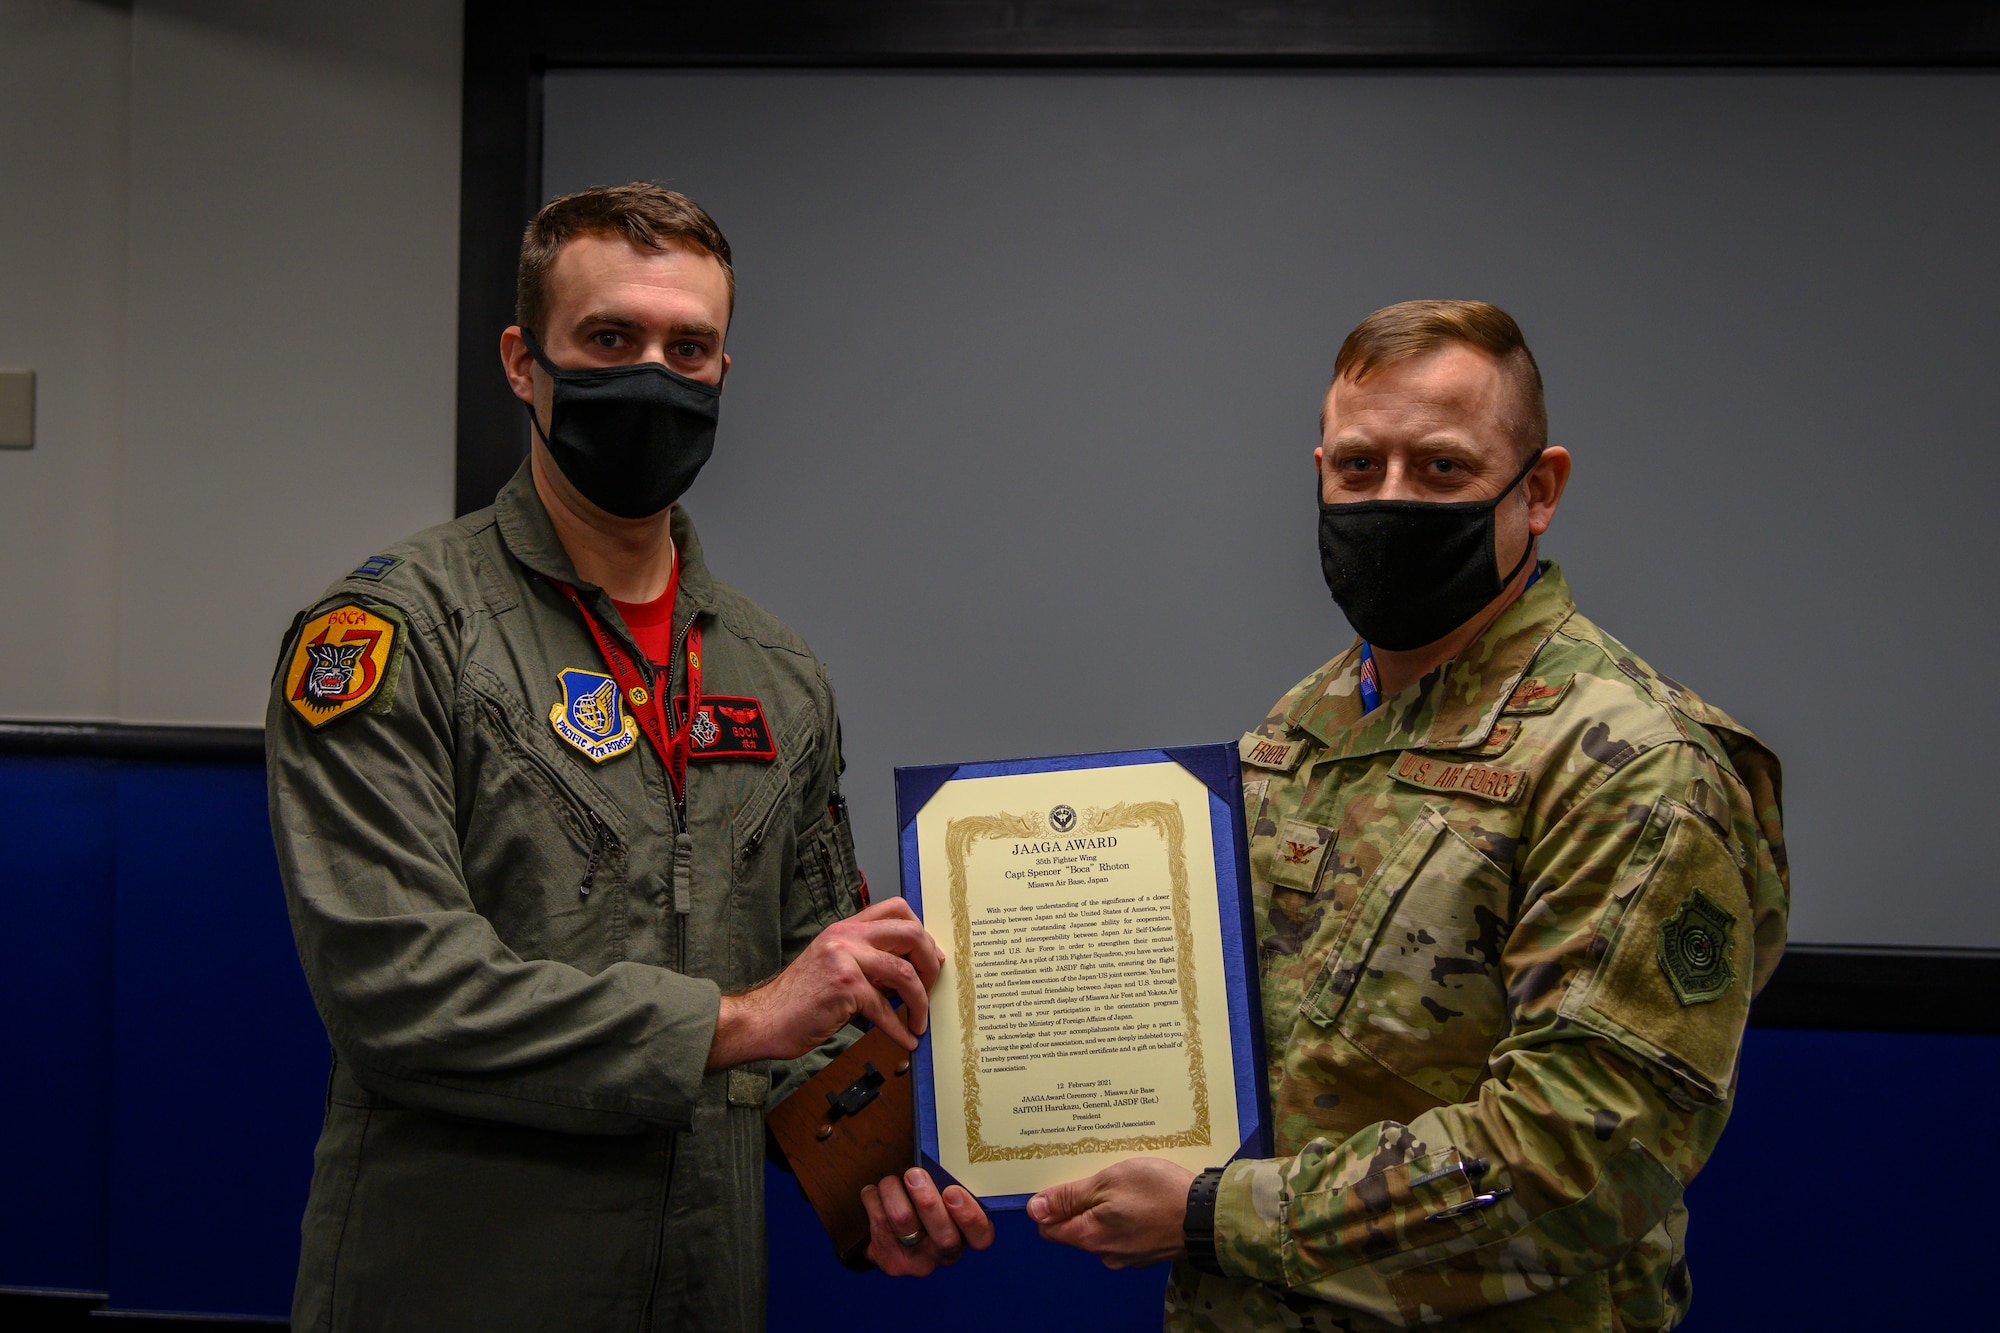 U.S. Air Force Capt. Spencer “Boca” Rhoton, left, a 13th Fighter Squadron F-16 Fighting Falcon pilot, receives the Japan-American Air Force Goodwill Association (JAAGA) award from Col. Jesse J. Friedel, right, the 35th Fighter Wing commander at Misawa Air Base, Japan, April 7, 2021. The JAAGA recognized Rhoton for his dedicated time to building a strong bond and partnership with the Japanese members at Misawa Air Base, Japan, April 9. (U.S. Air Force photo by Airman 1st Class China M. Shock)